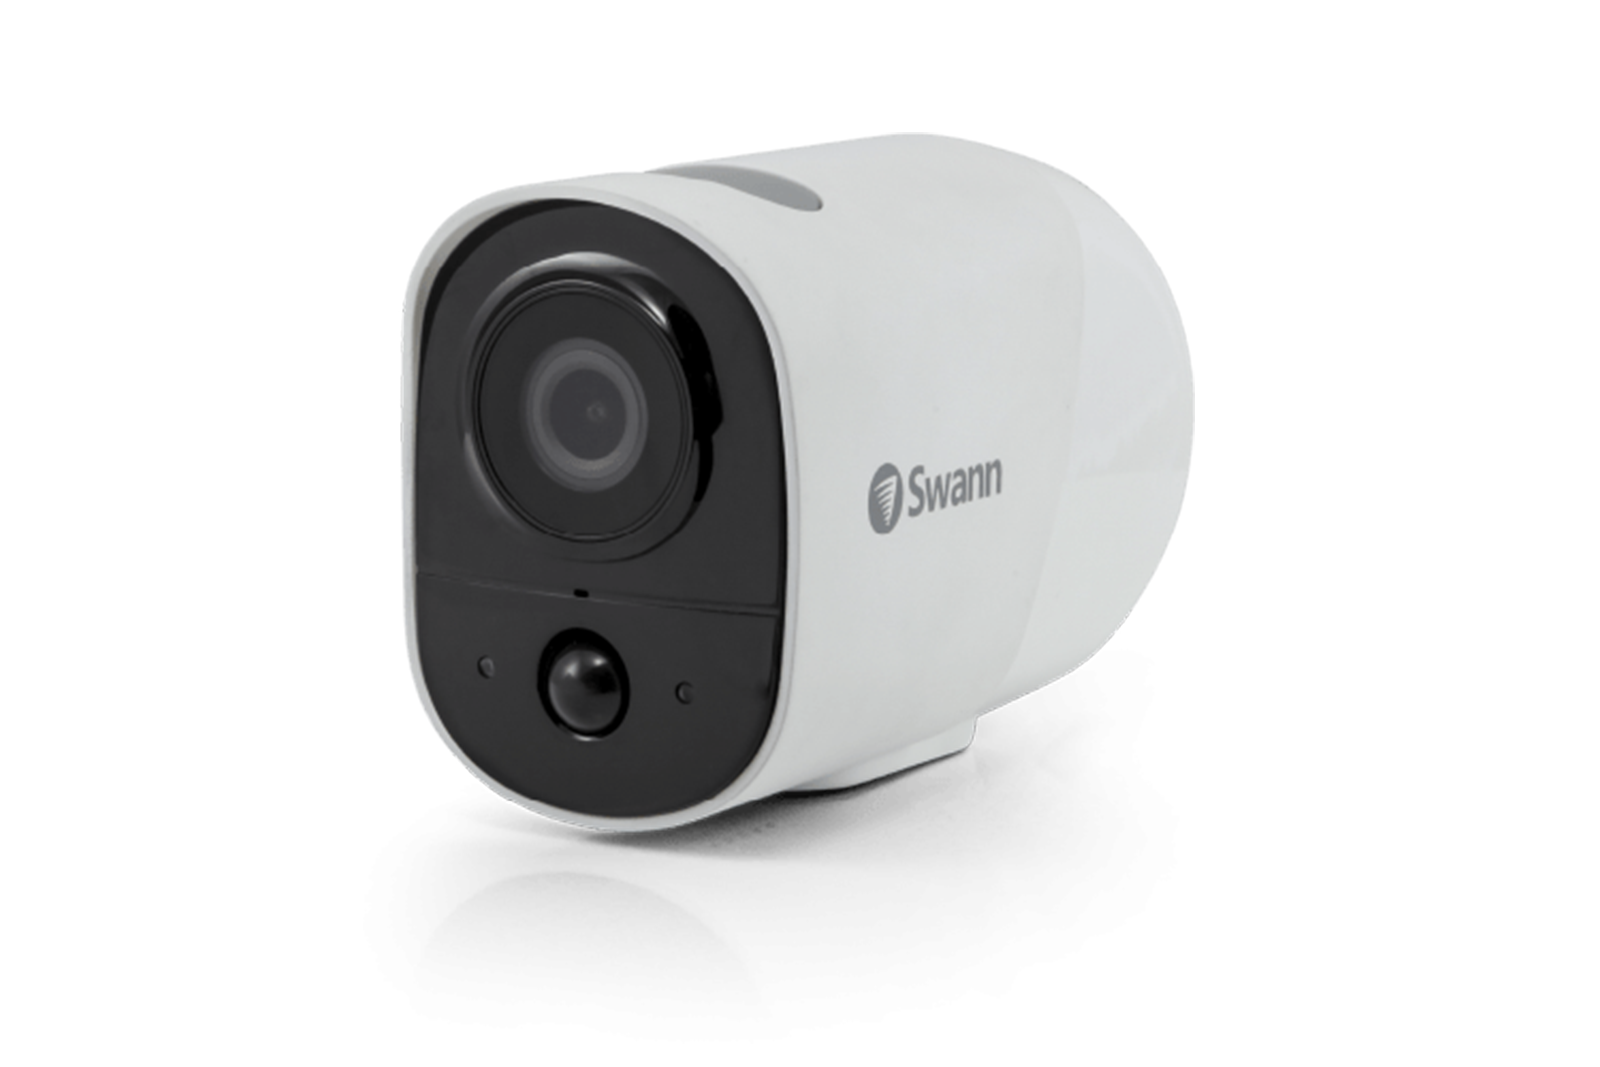 Swann's Xtreem all-wireless security camera takes home security to the next level photo 1